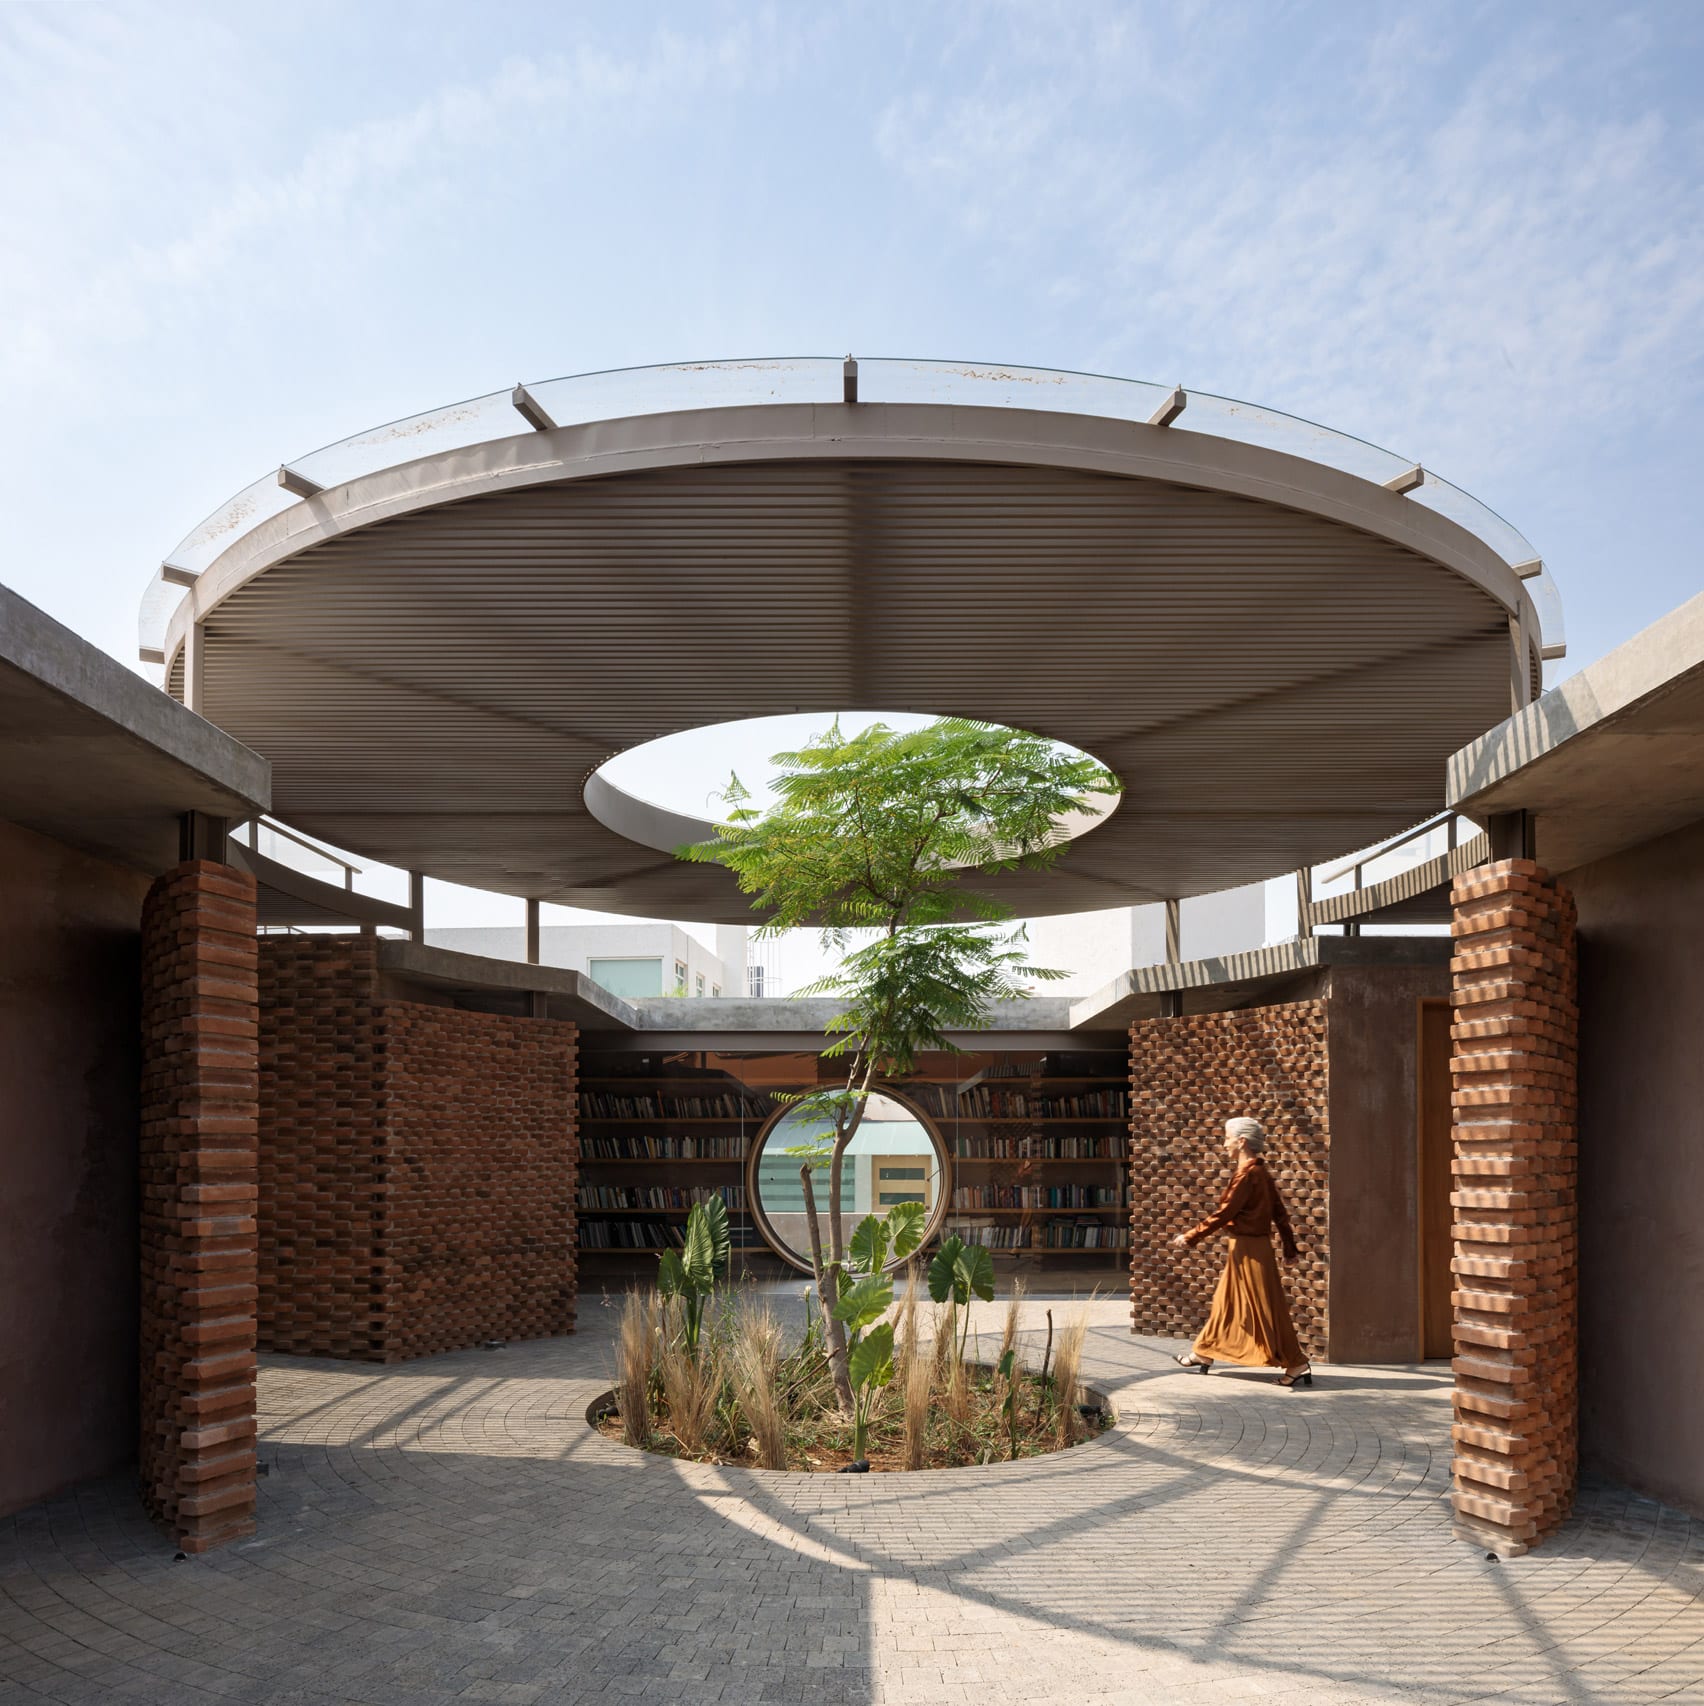 Tree growing through oculus in a courtyard canopy of a house in Mexico